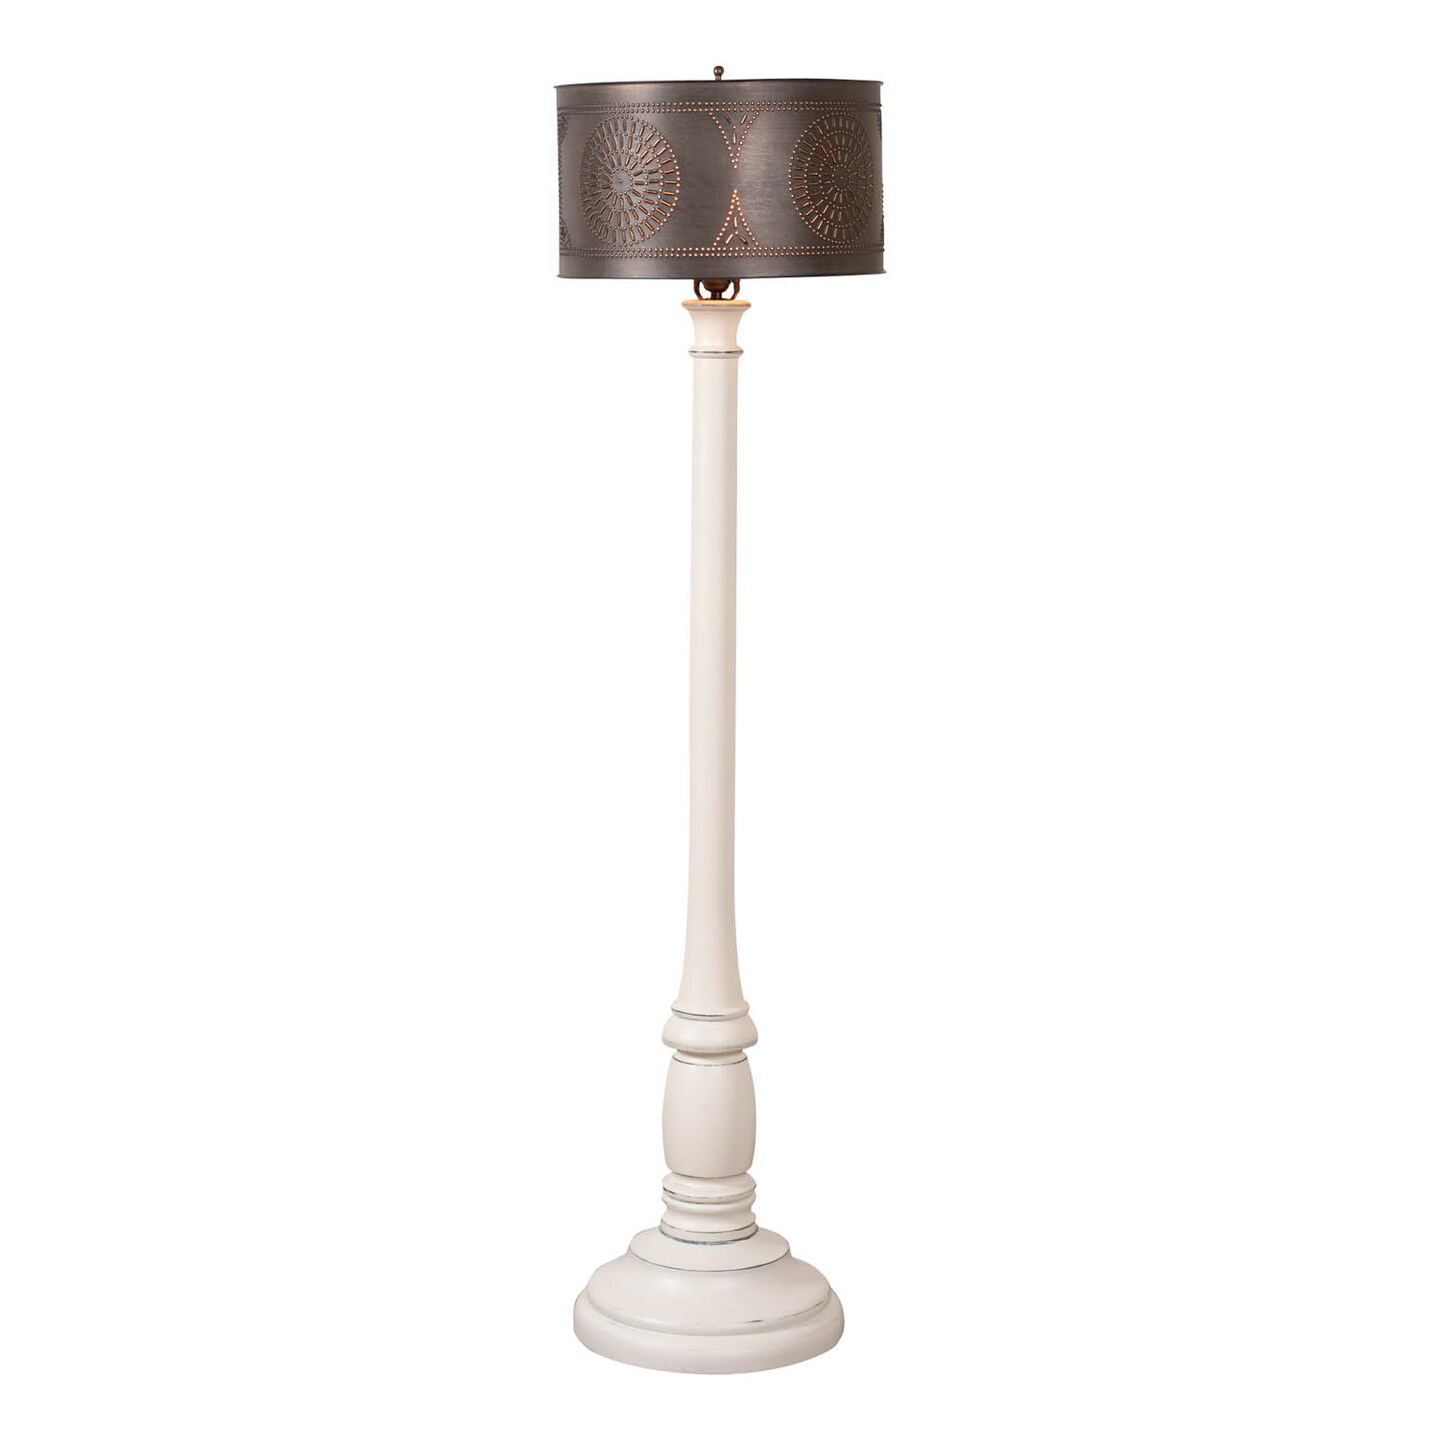 Irvins Country Tinware Brinton Floor Lamp in Rustic White with Metal Drum Shade